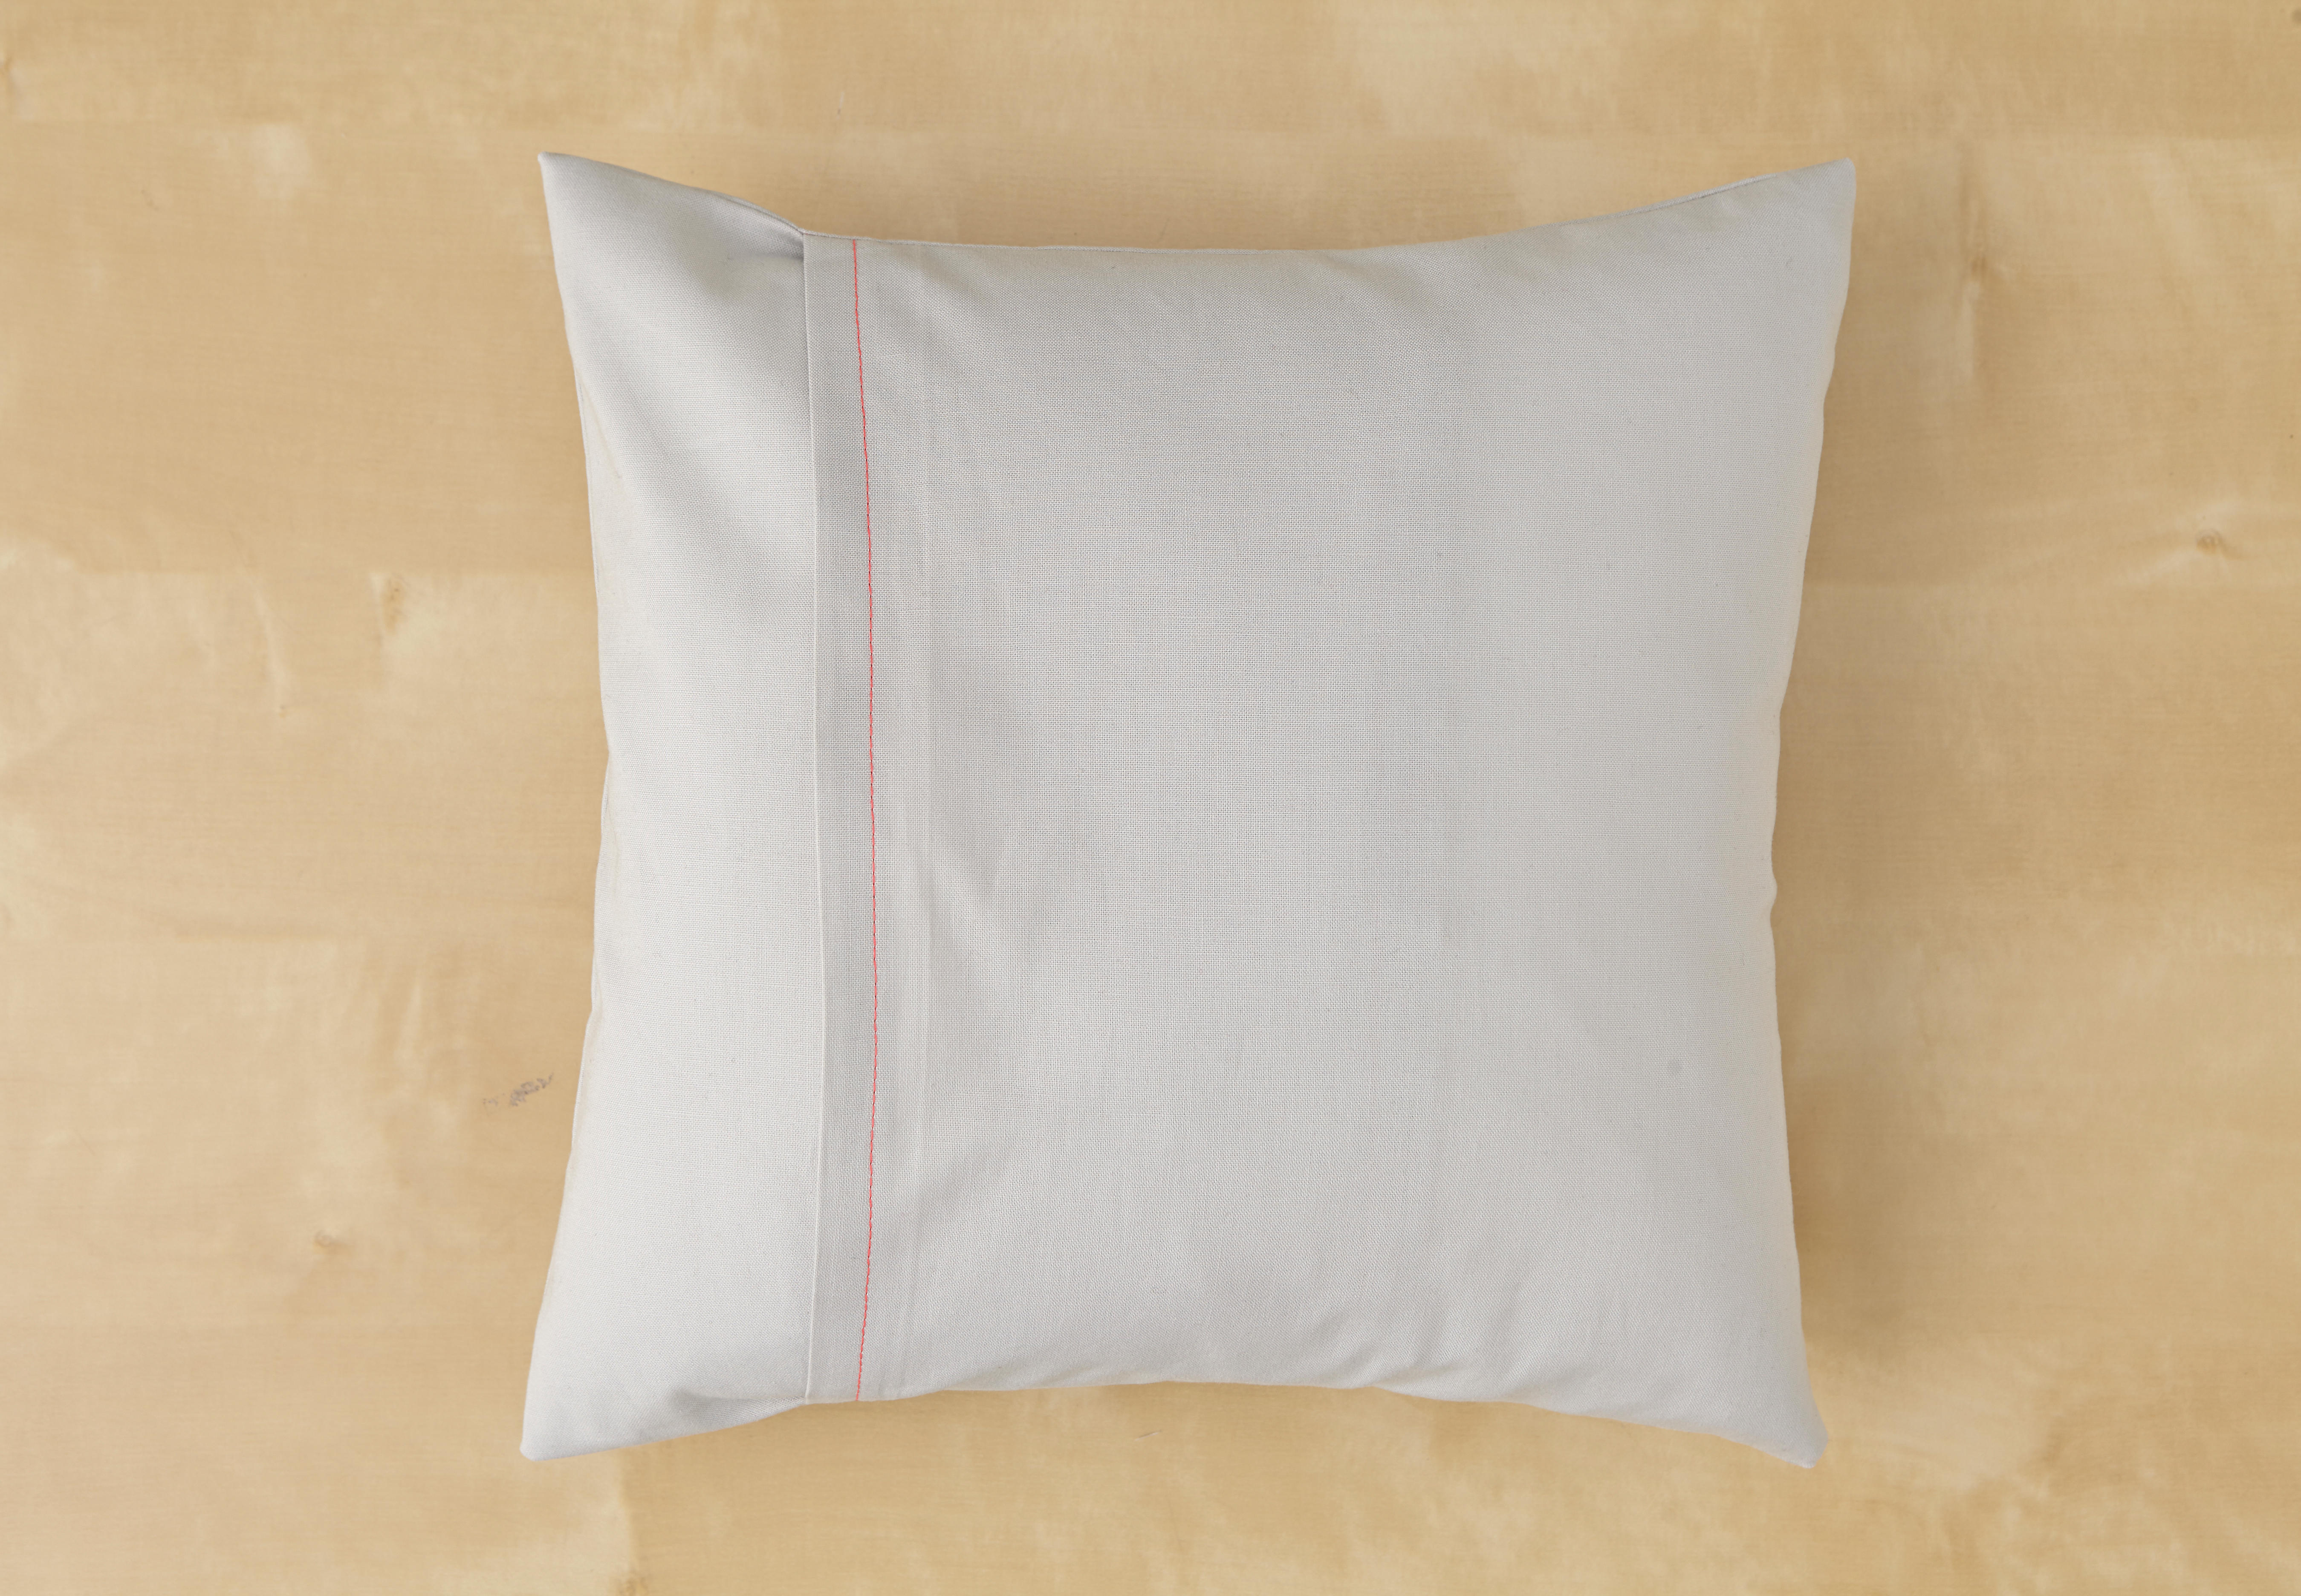 How to make an envelope cushion cover